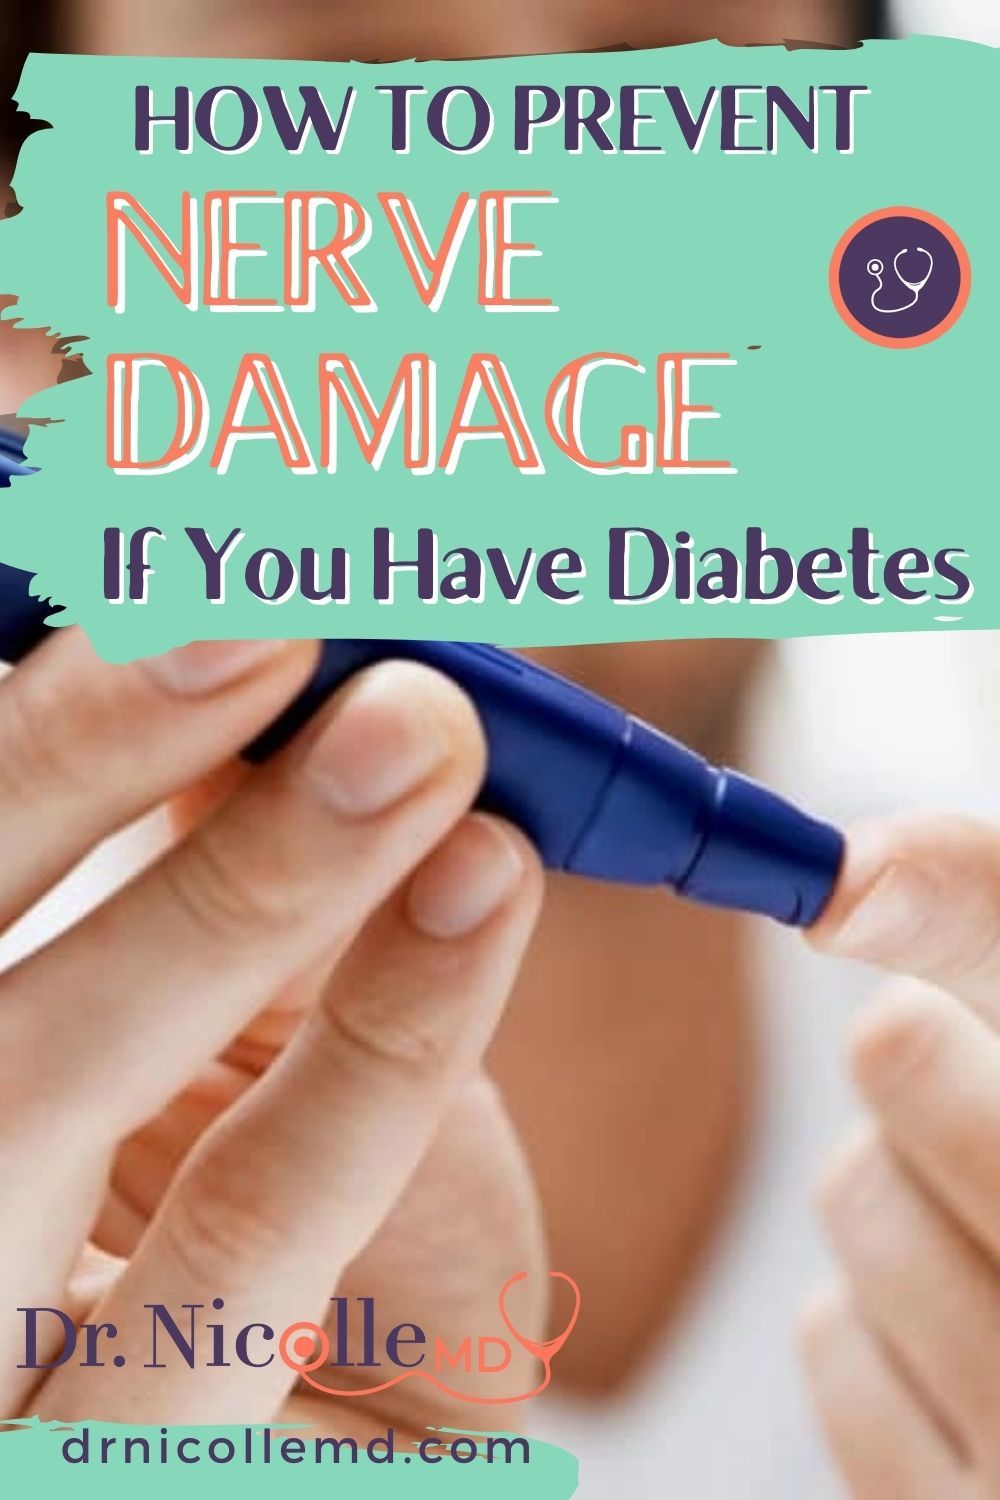 How to Prevent Nerve Damage If You Have Diabetes